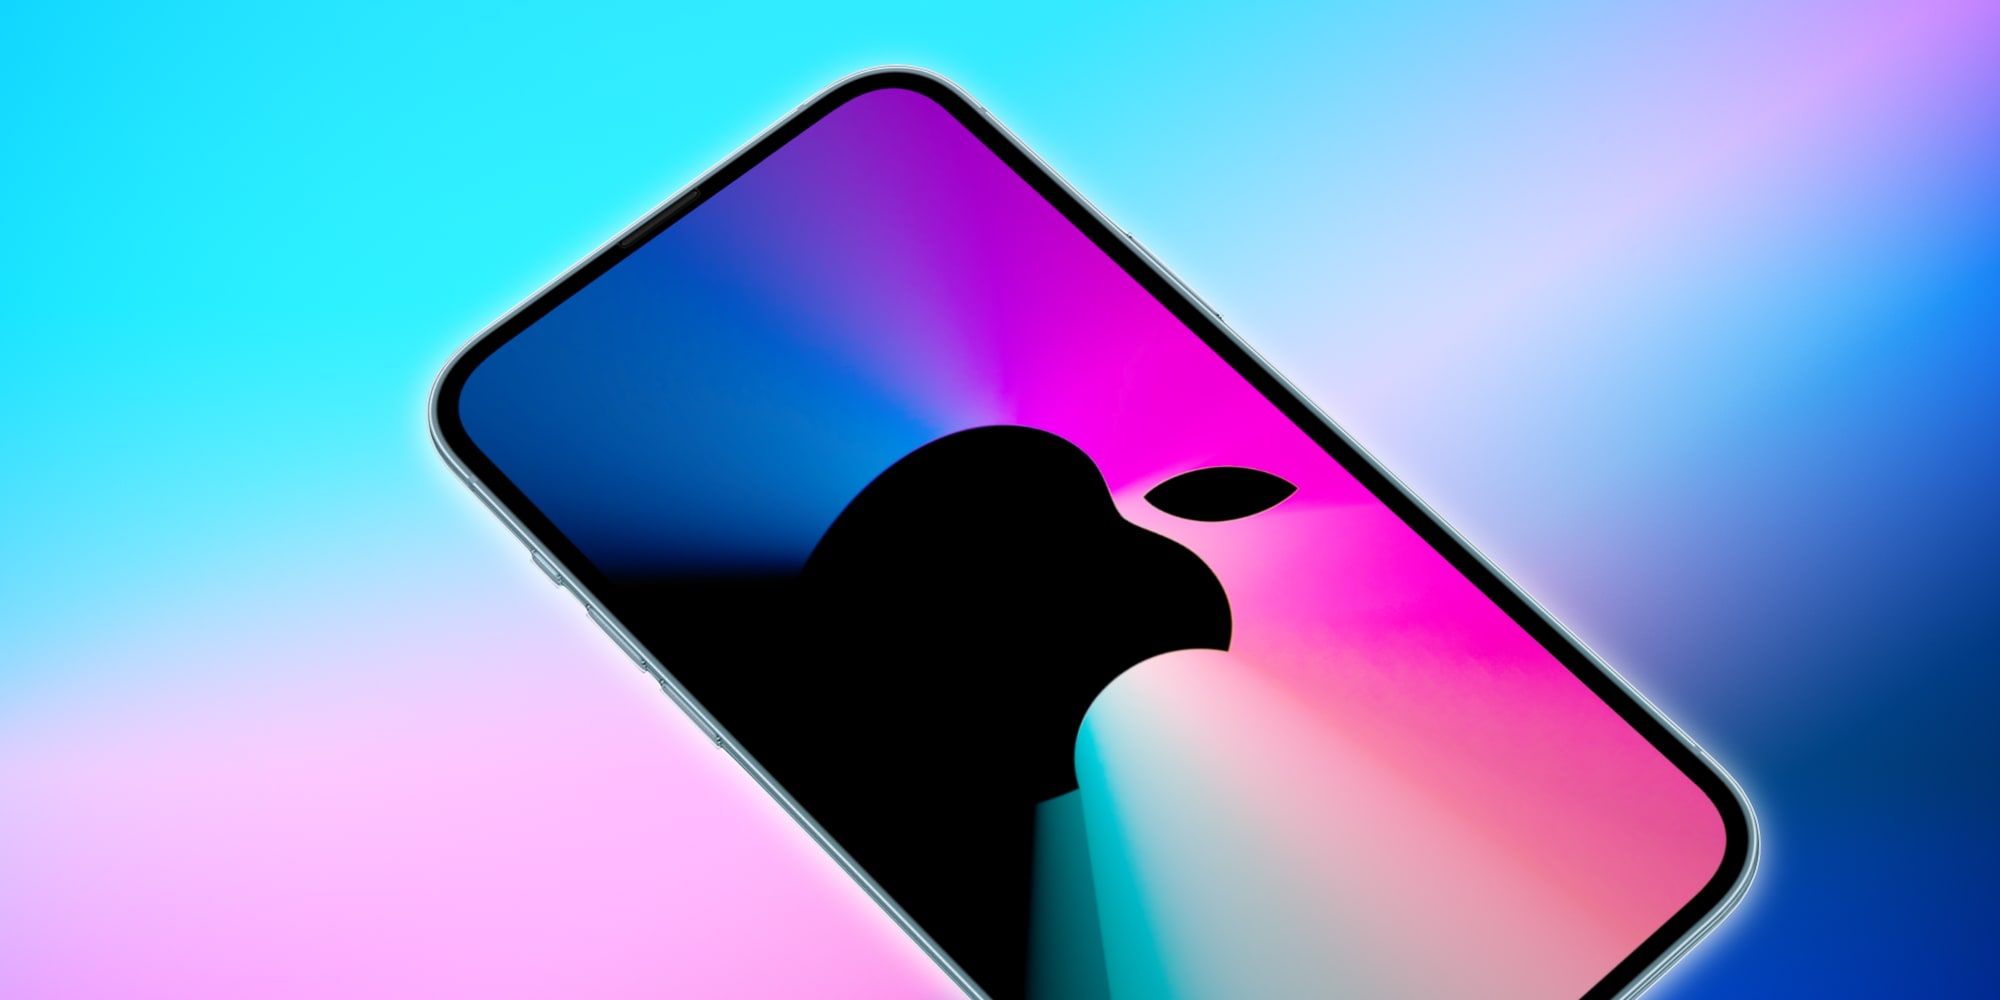 Insiders Agree That Apples iPhone 14 Will Do Away With The Notch